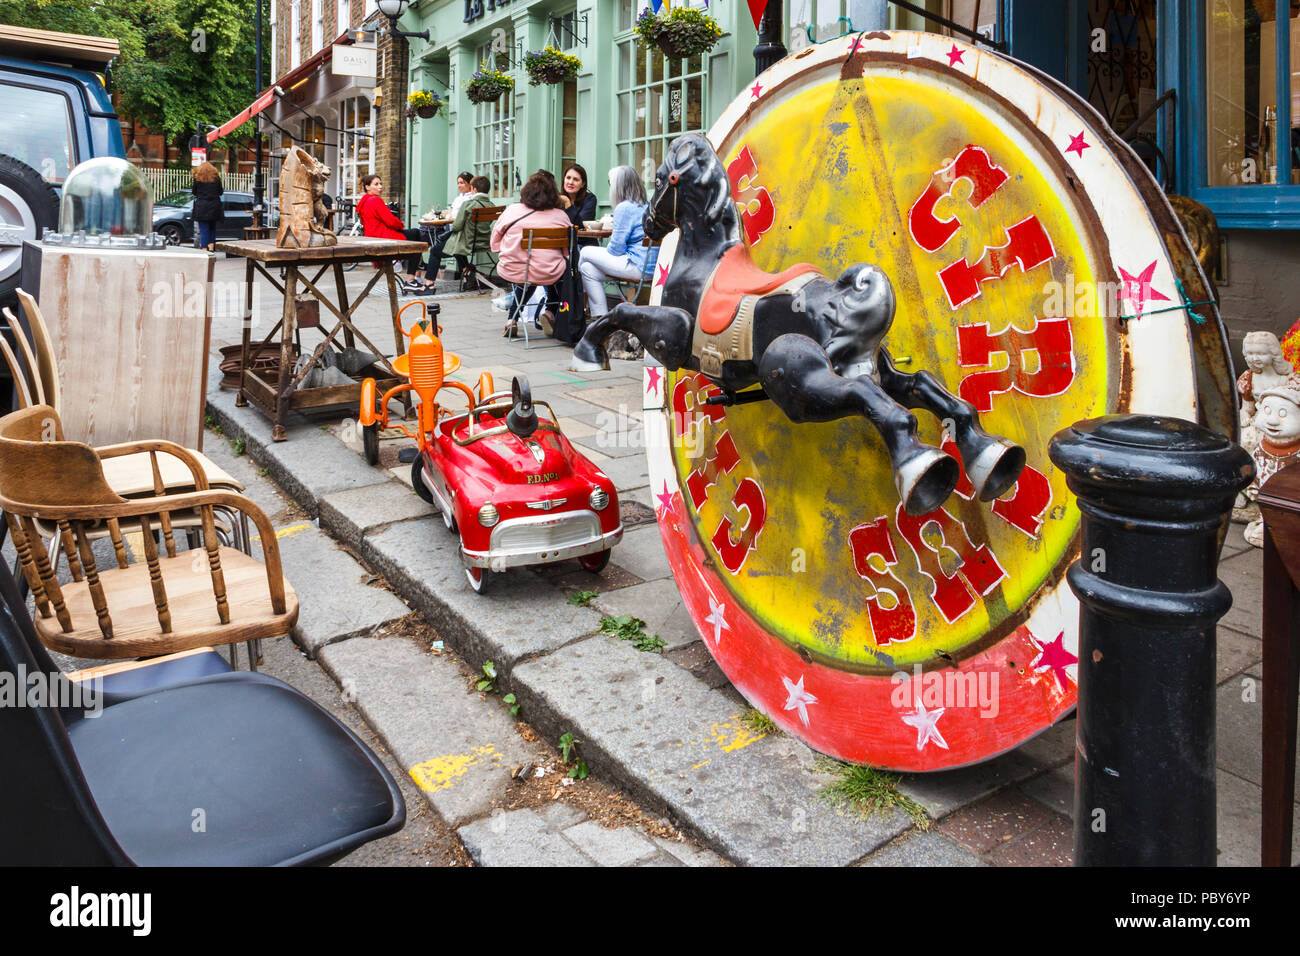 Retro bric-a-brac, toys and furniture outside a shop in Highgate Village, London, UK Stock Photo